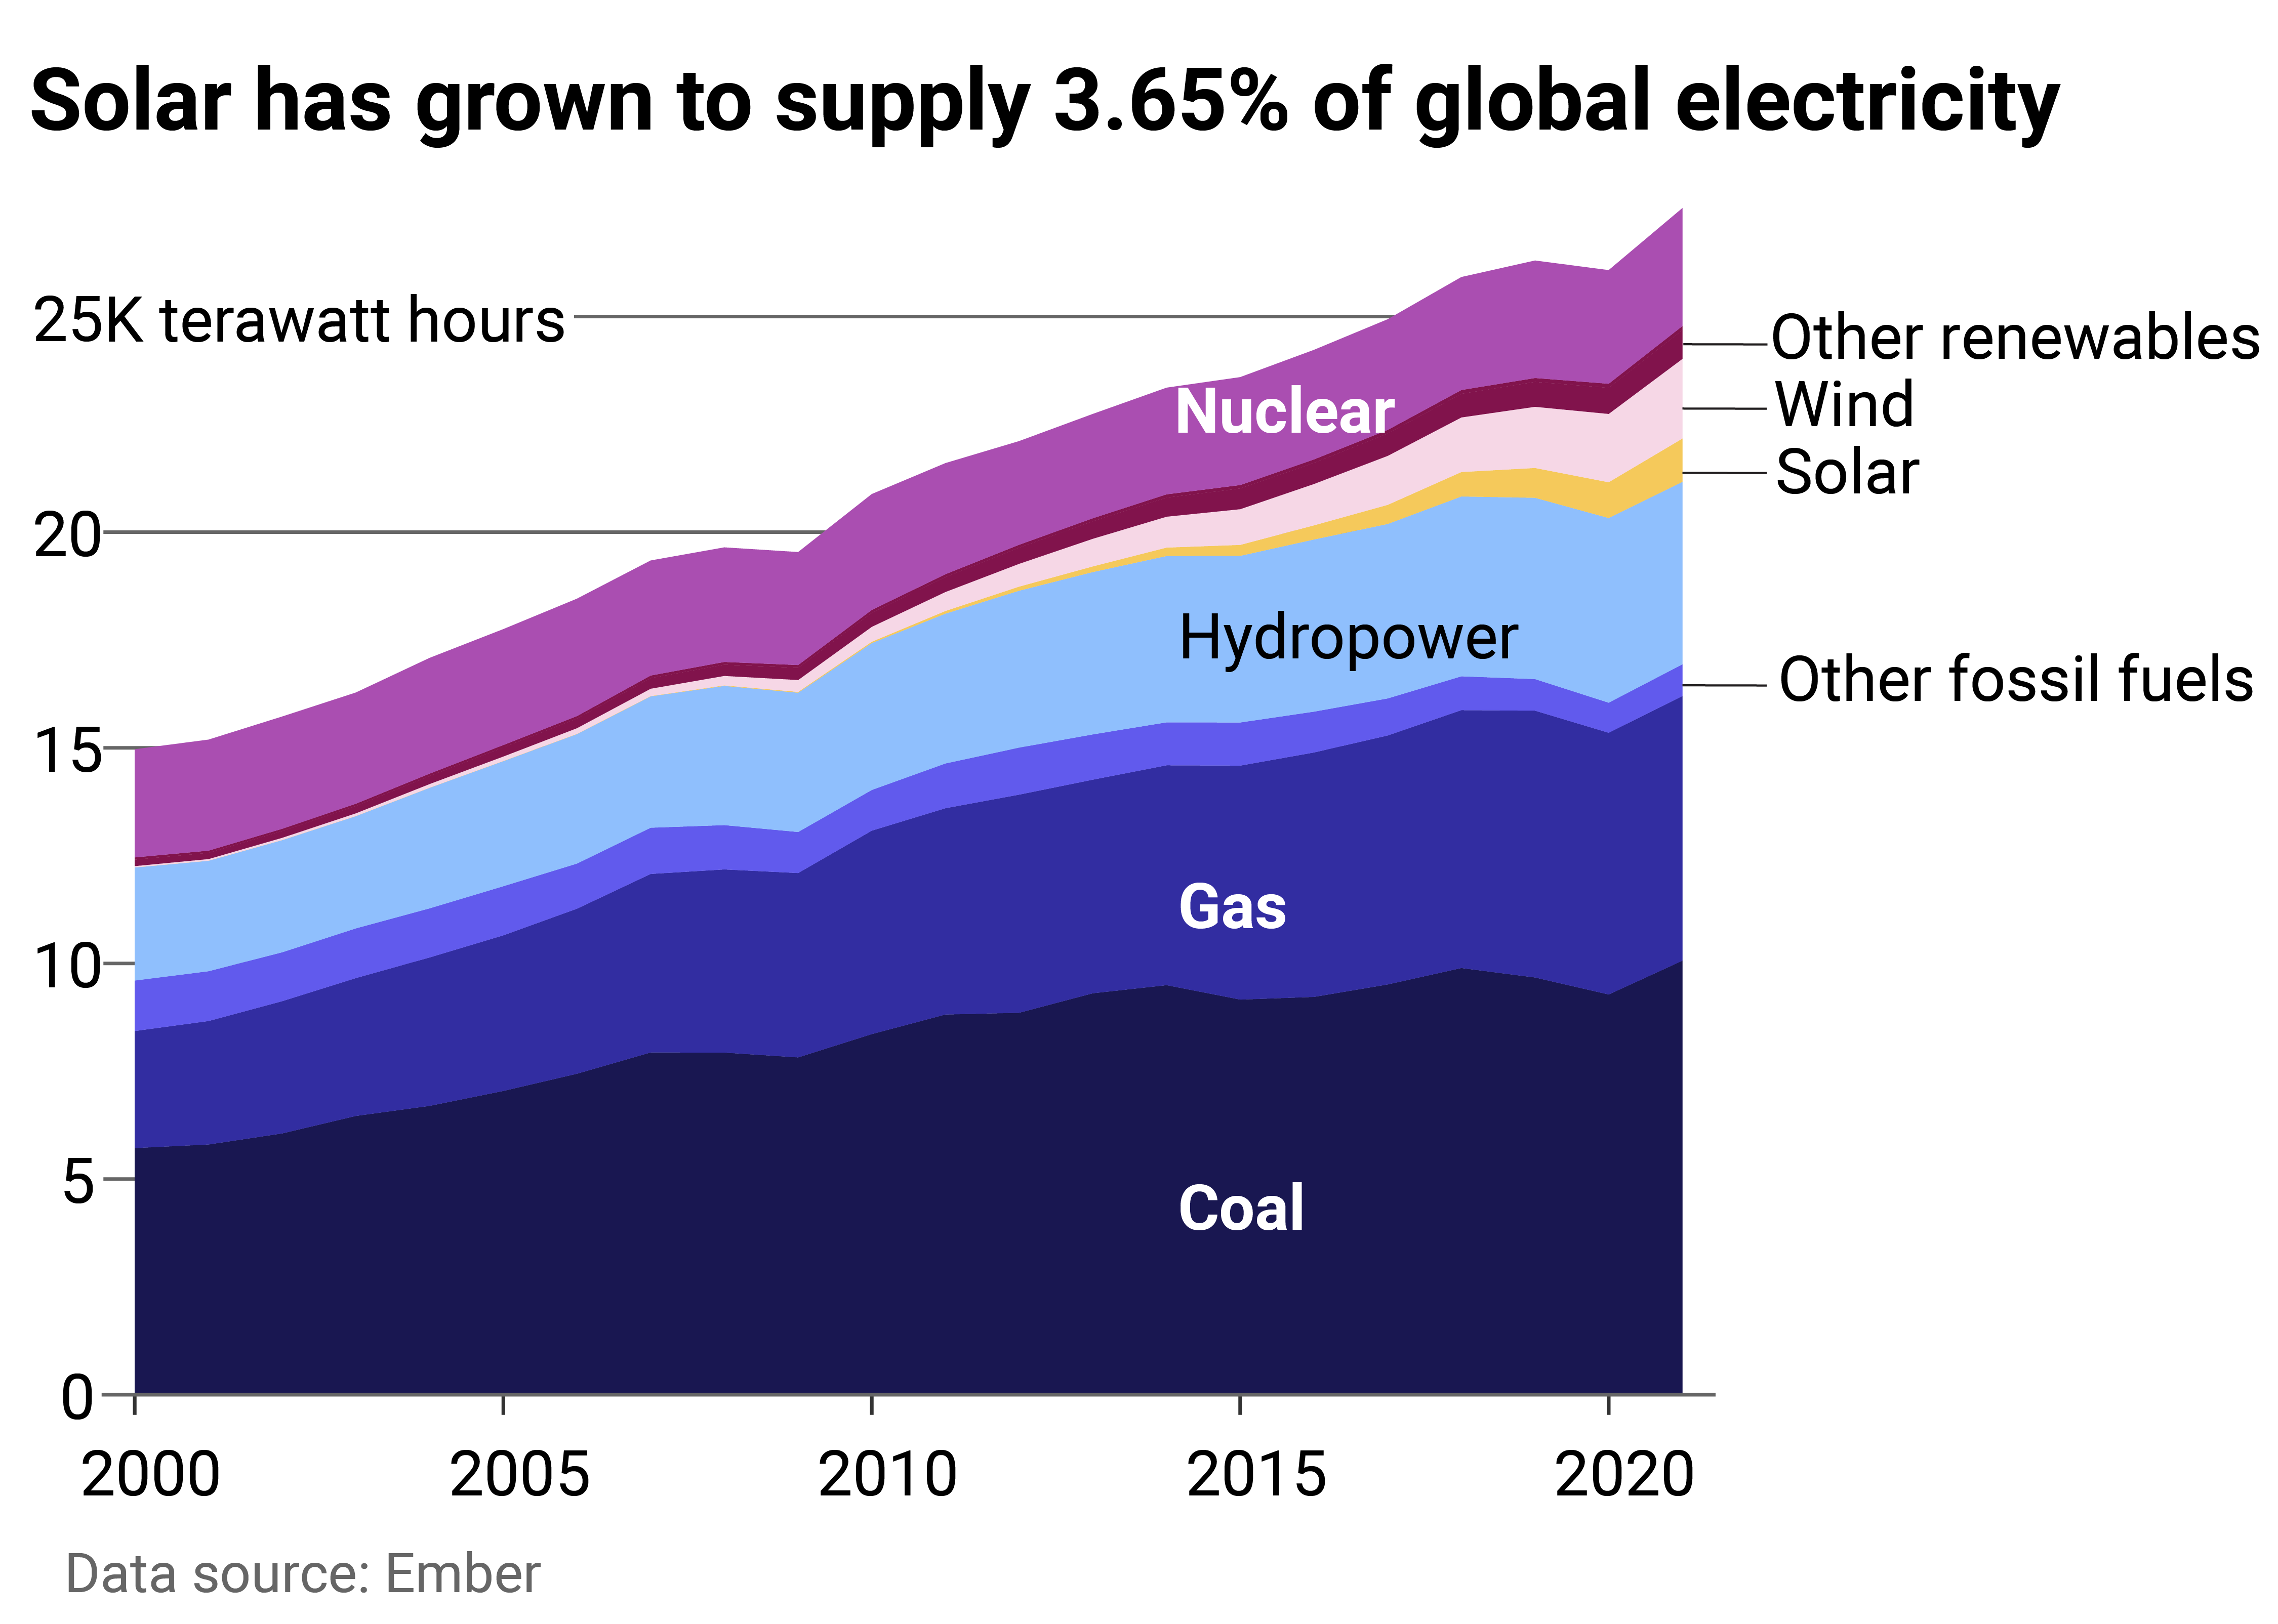 Area chart showing solar as share of global electricity production has reached 3.65%